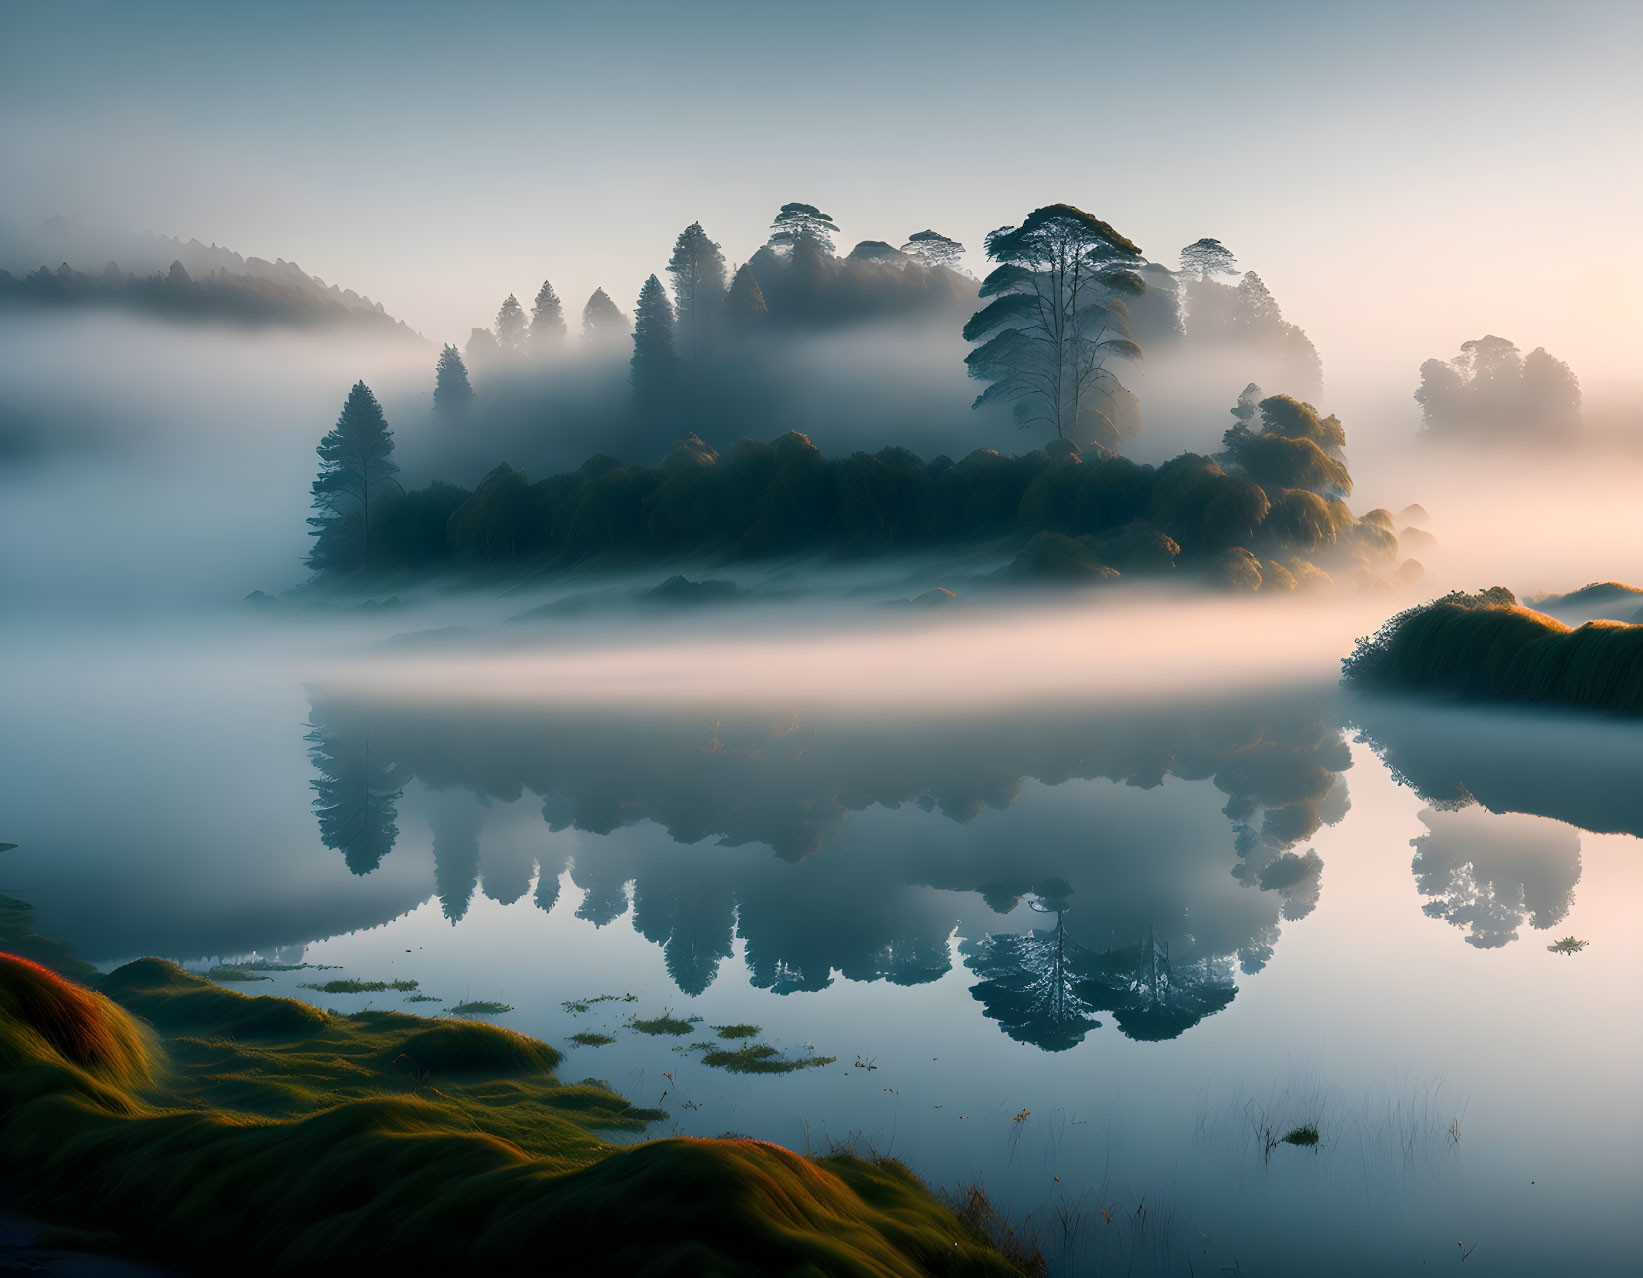 Tranquil foggy lake scene with trees reflected in mist